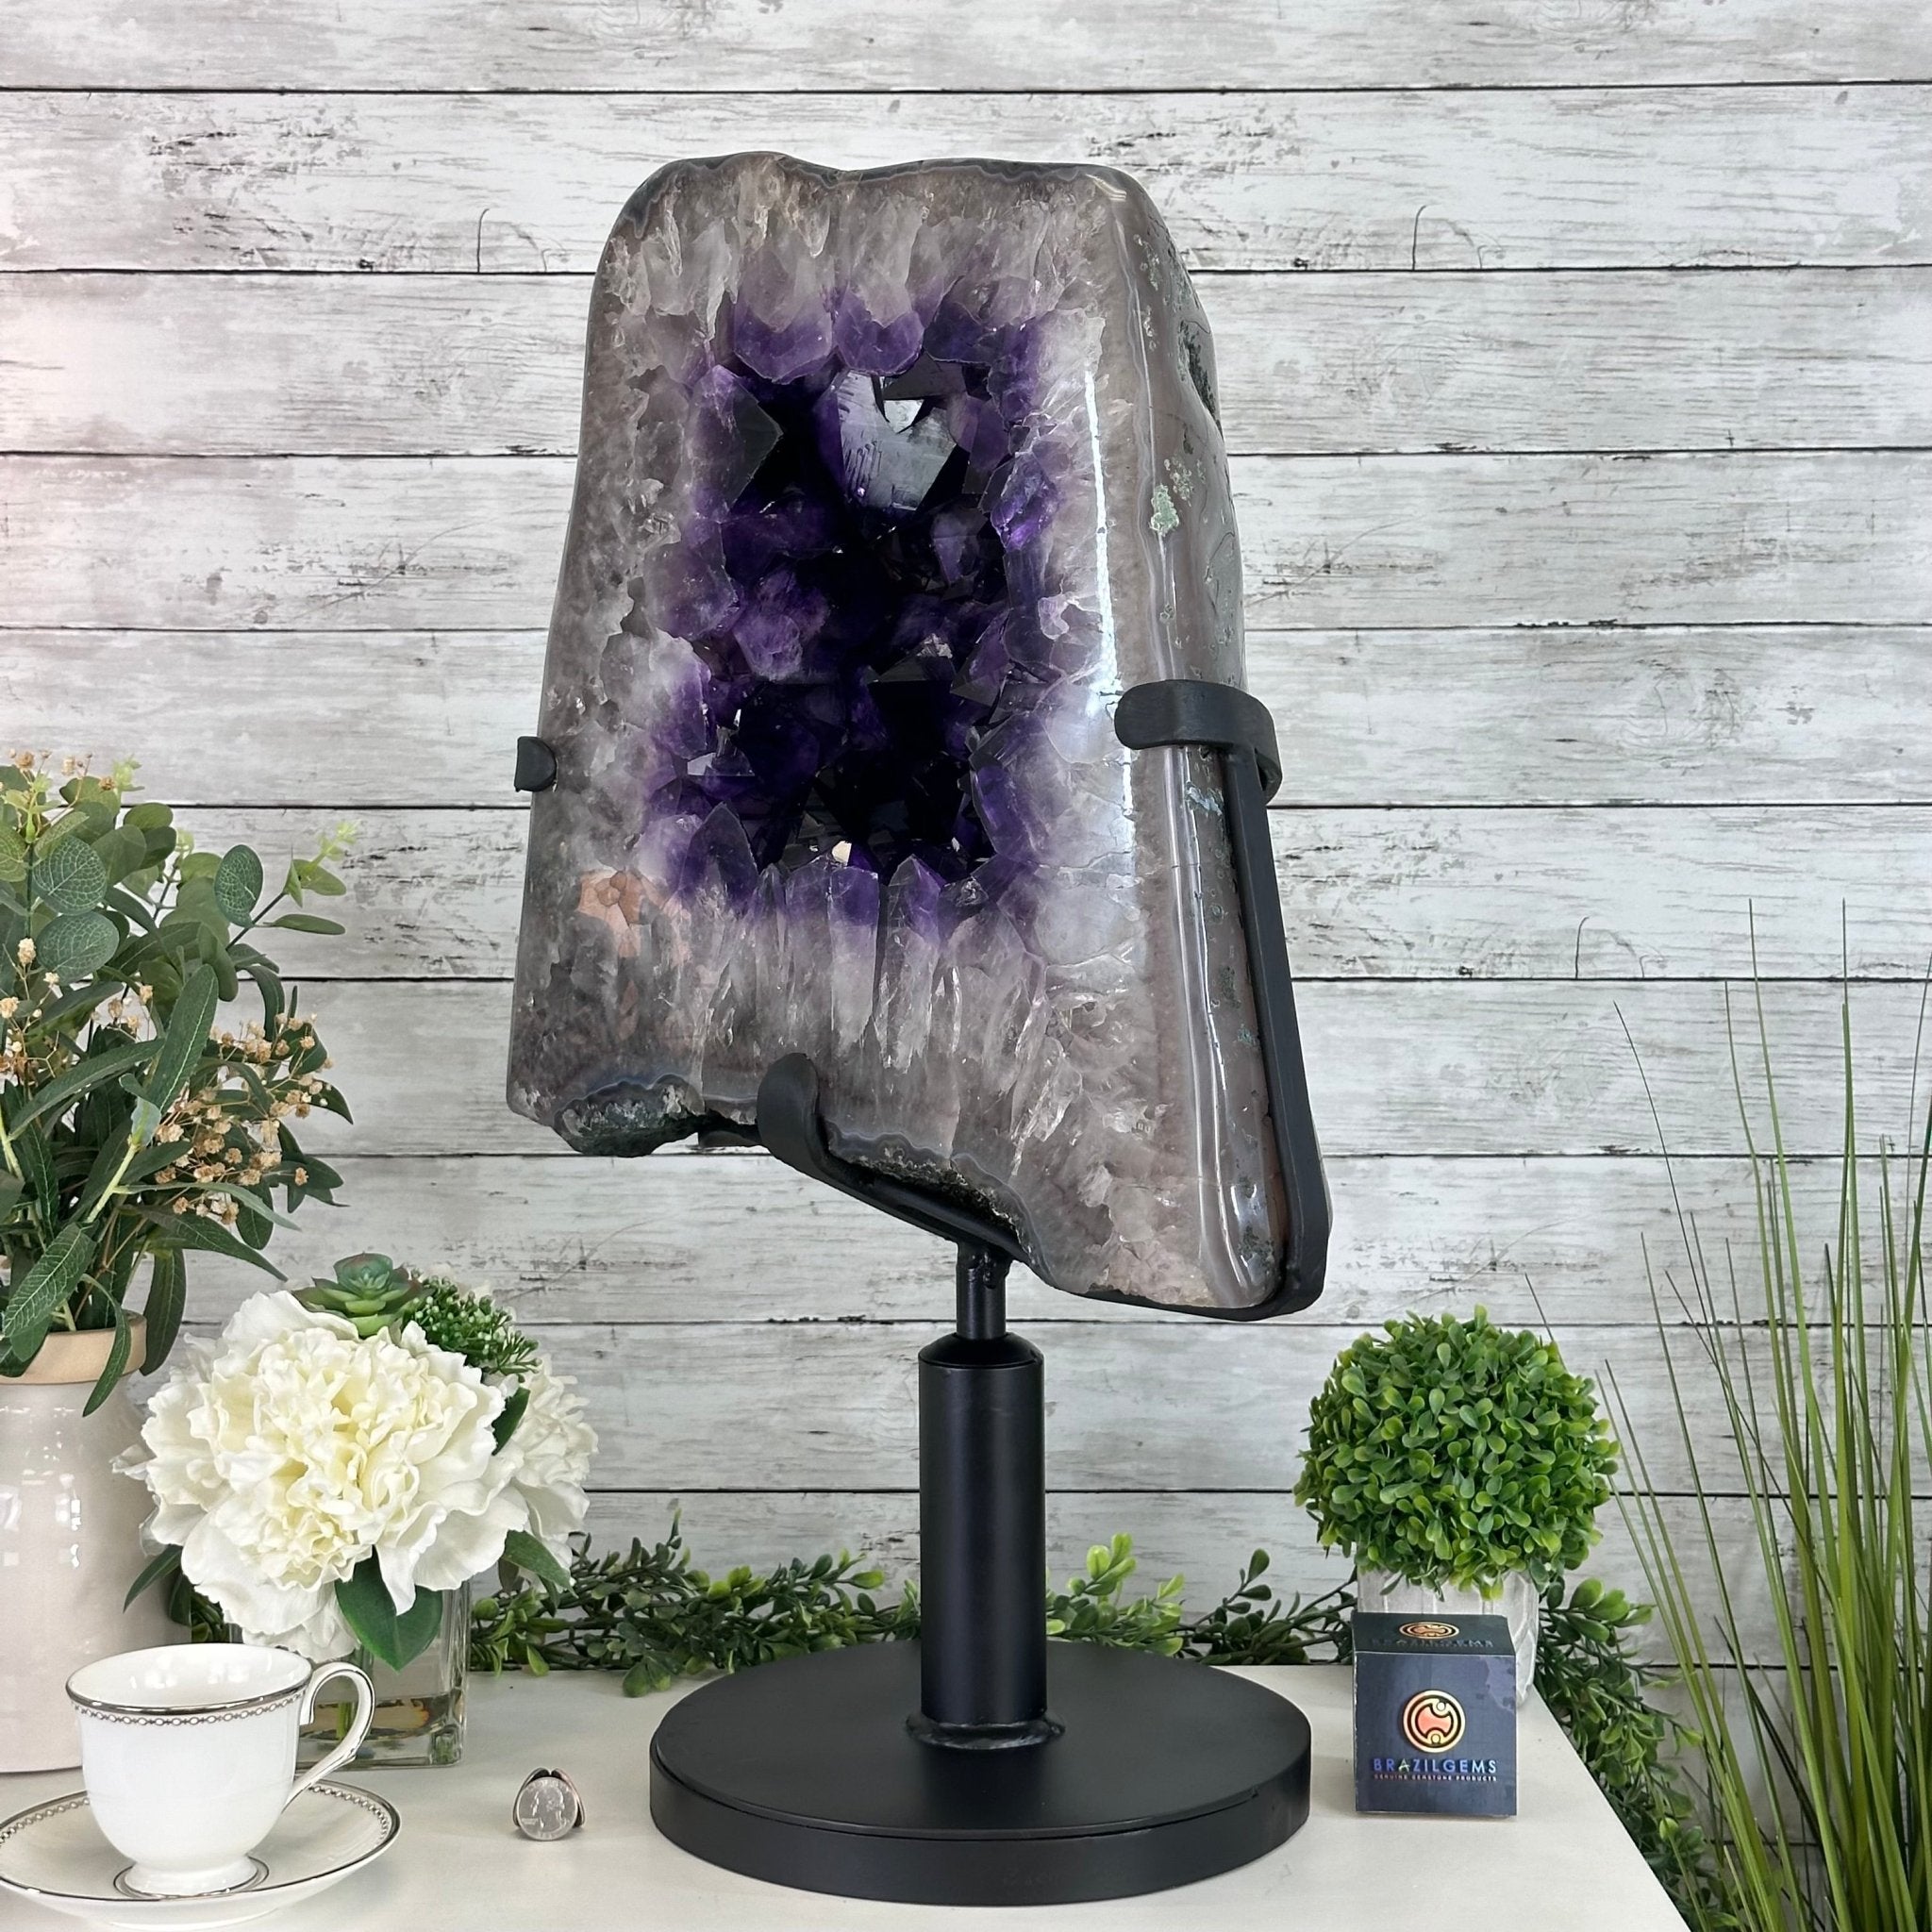 Super Quality Amethyst Cluster on Rotating Stand, 101.8 lbs & 26" Tall #5492 - 0032 - Brazil GemsBrazil GemsSuper Quality Amethyst Cluster on Rotating Stand, 101.8 lbs & 26" Tall #5492 - 0032Clusters on Rotating Bases5492 - 0032